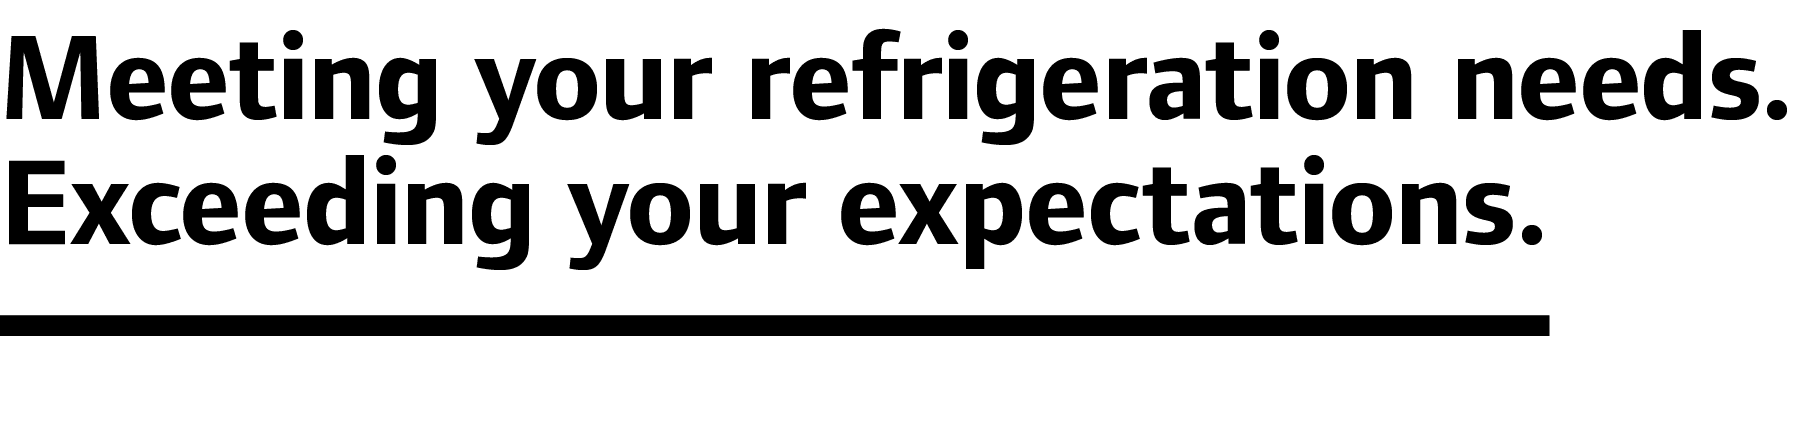 Meeting your refrigeration needs.Exceeding your expectations. 